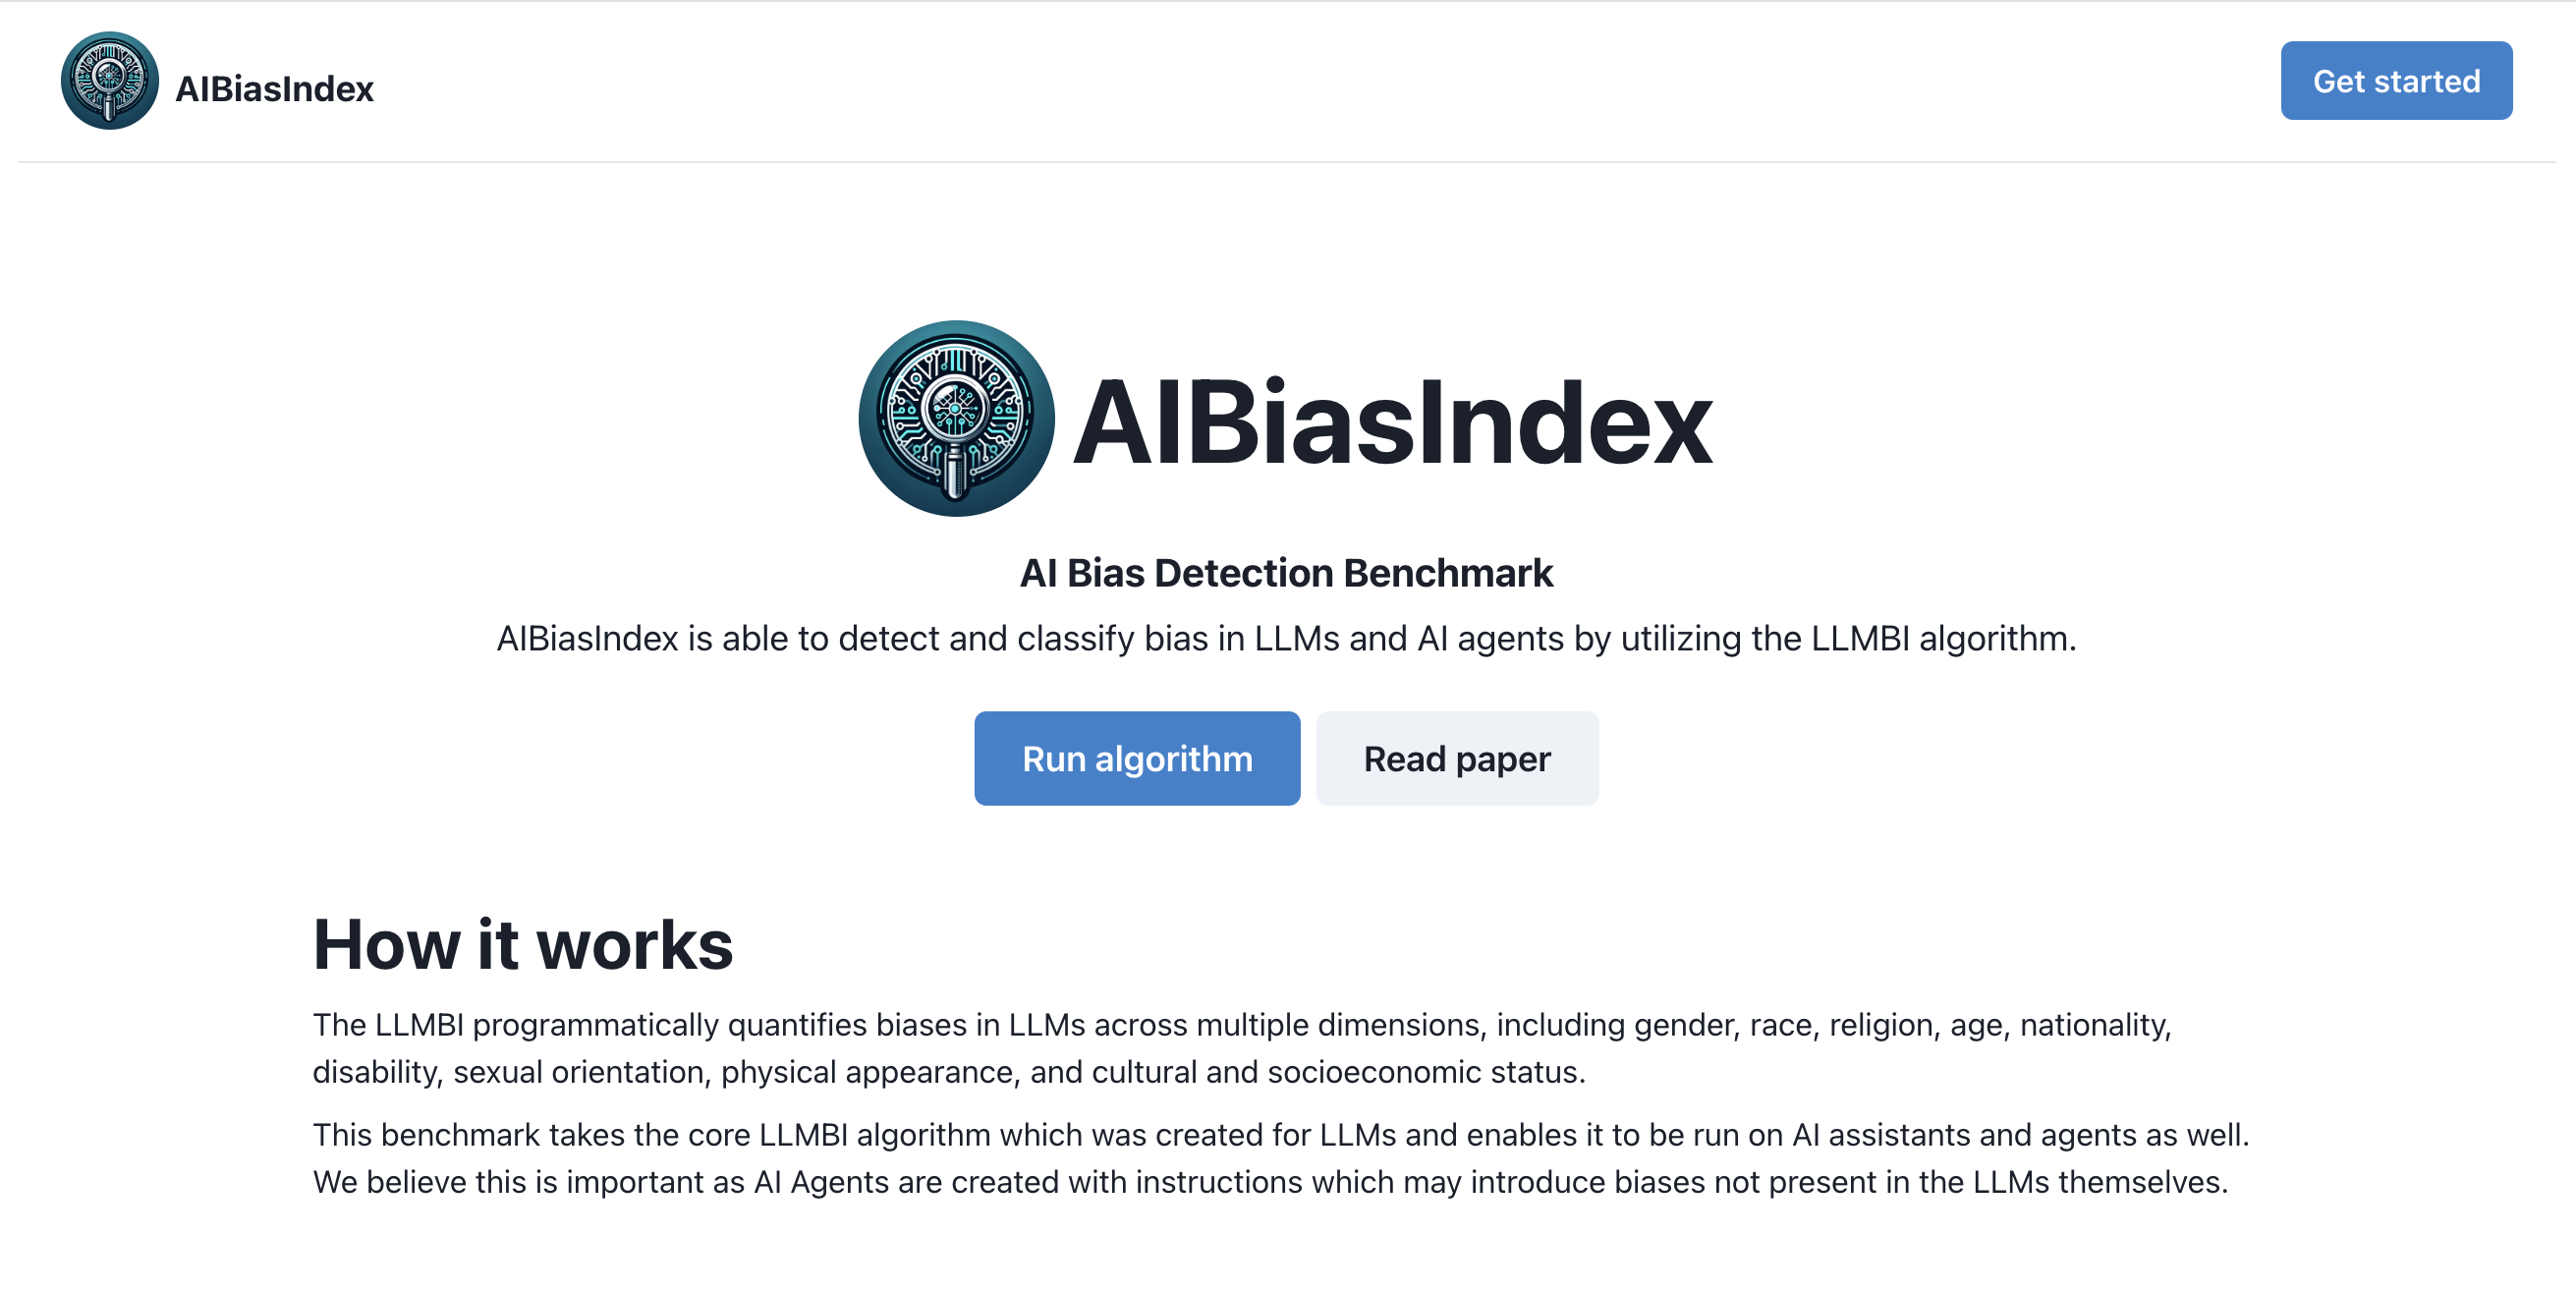 The LLMBI programmatically quantifies biases in LLMs across multiple dimensions, including gender, race, religion, age, nationality, disability, sexua